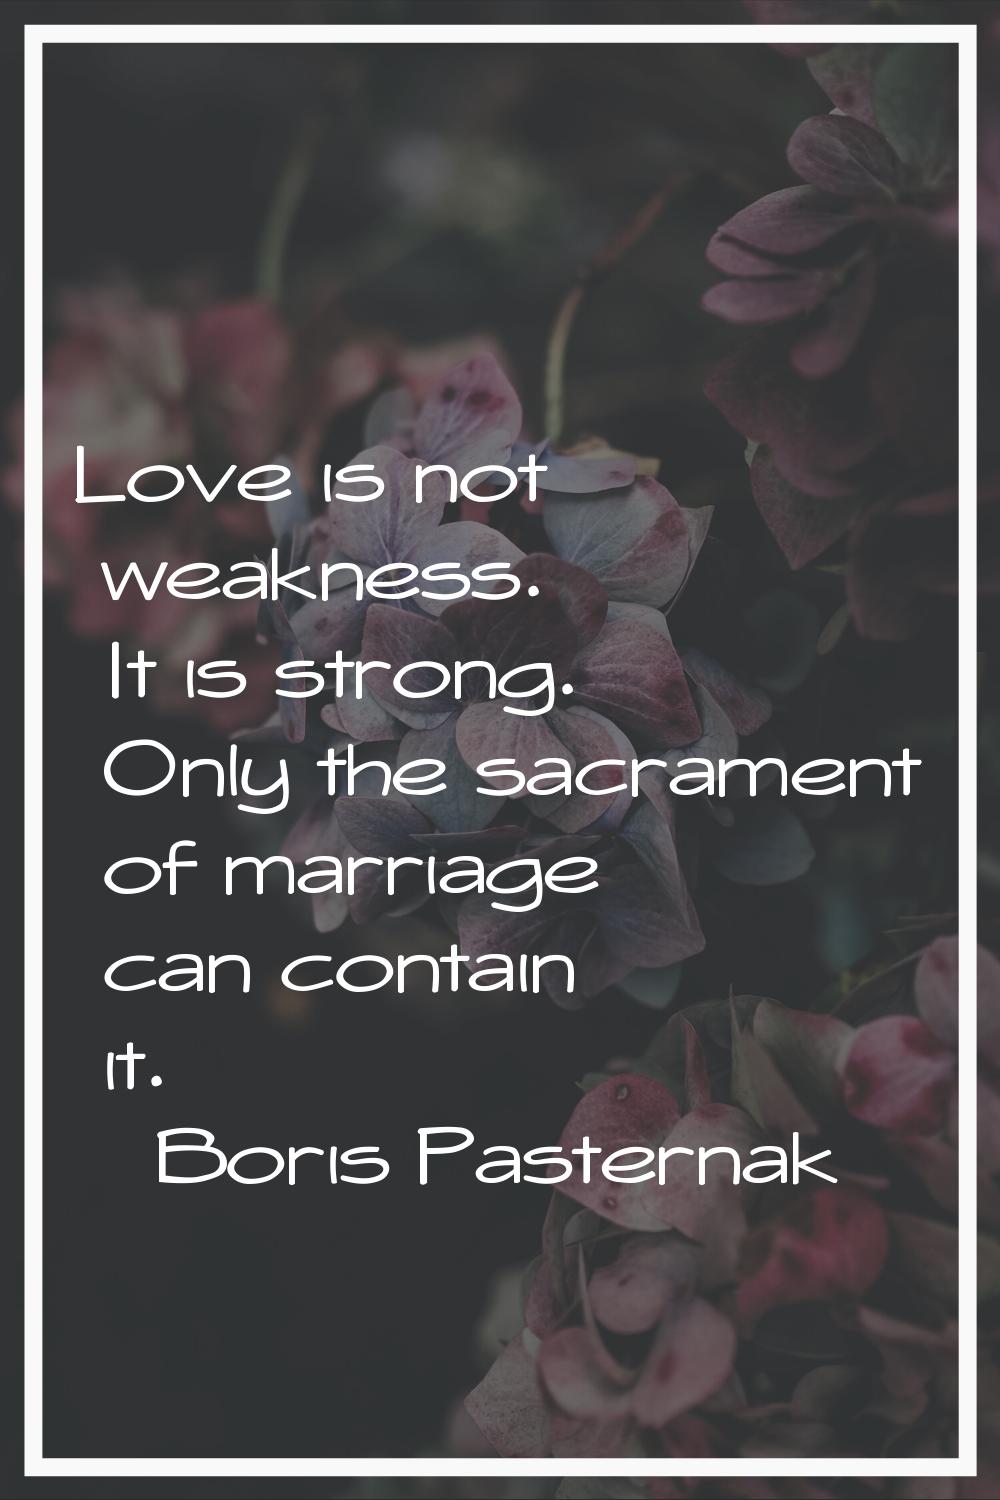 Love is not weakness. It is strong. Only the sacrament of marriage can contain it.